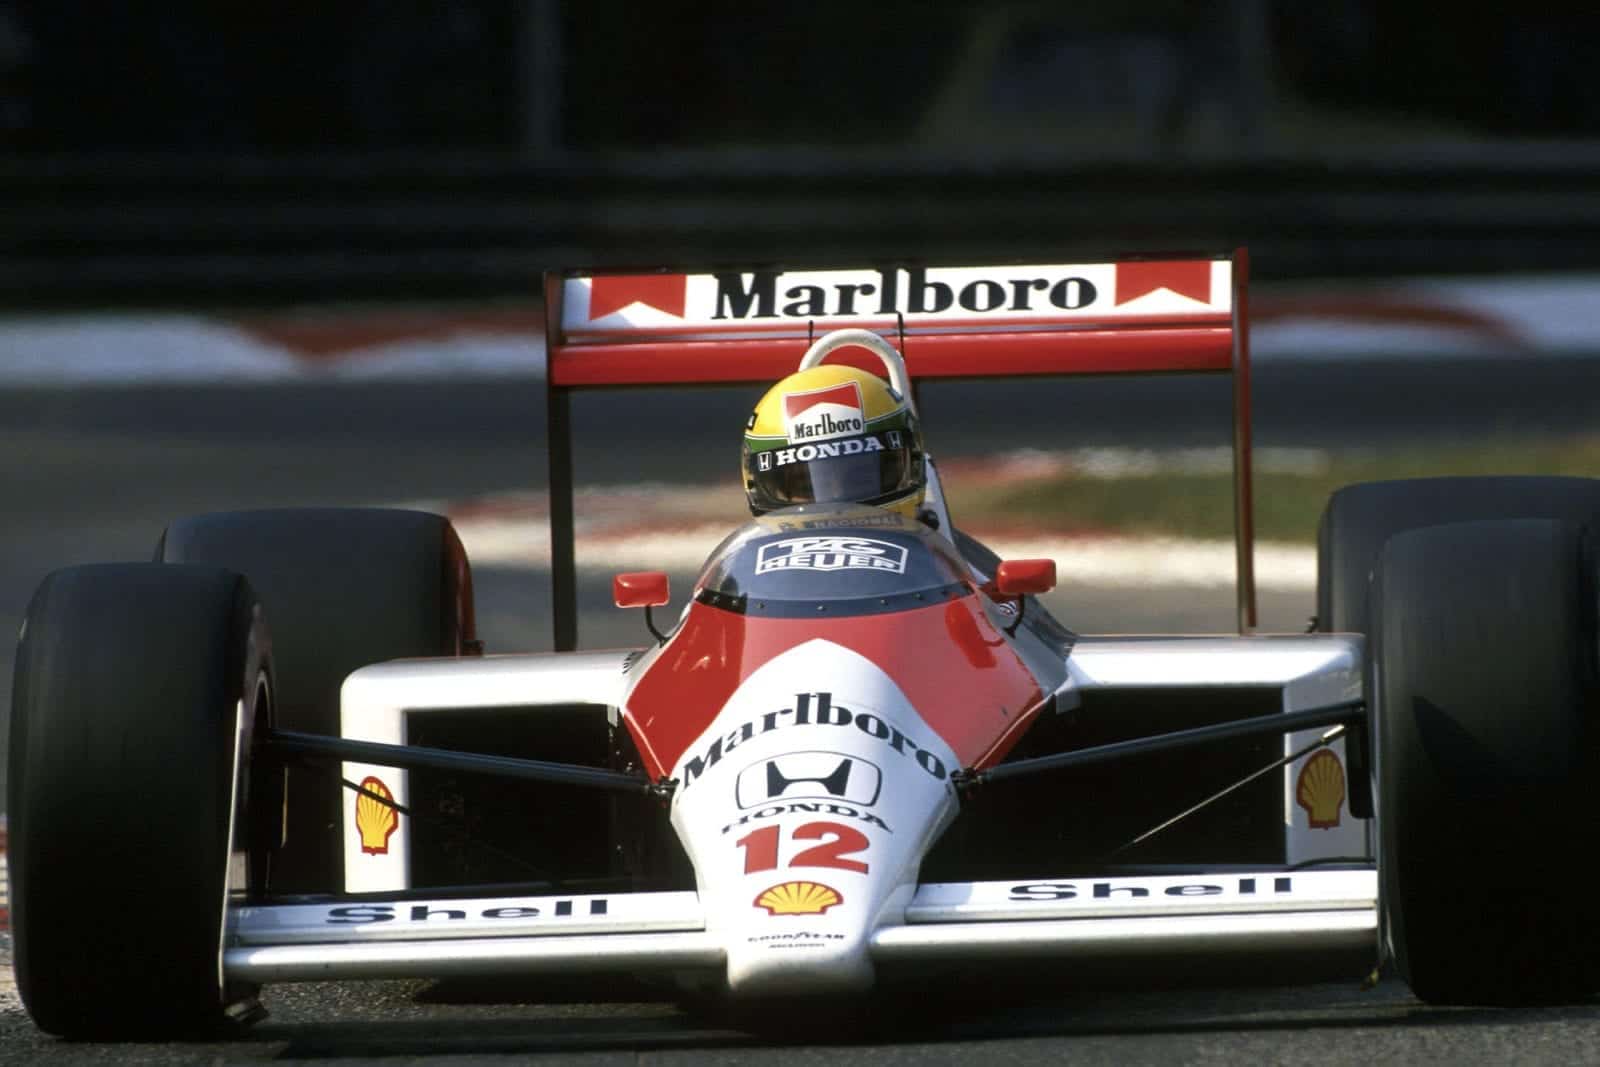 1988 GER GP feature